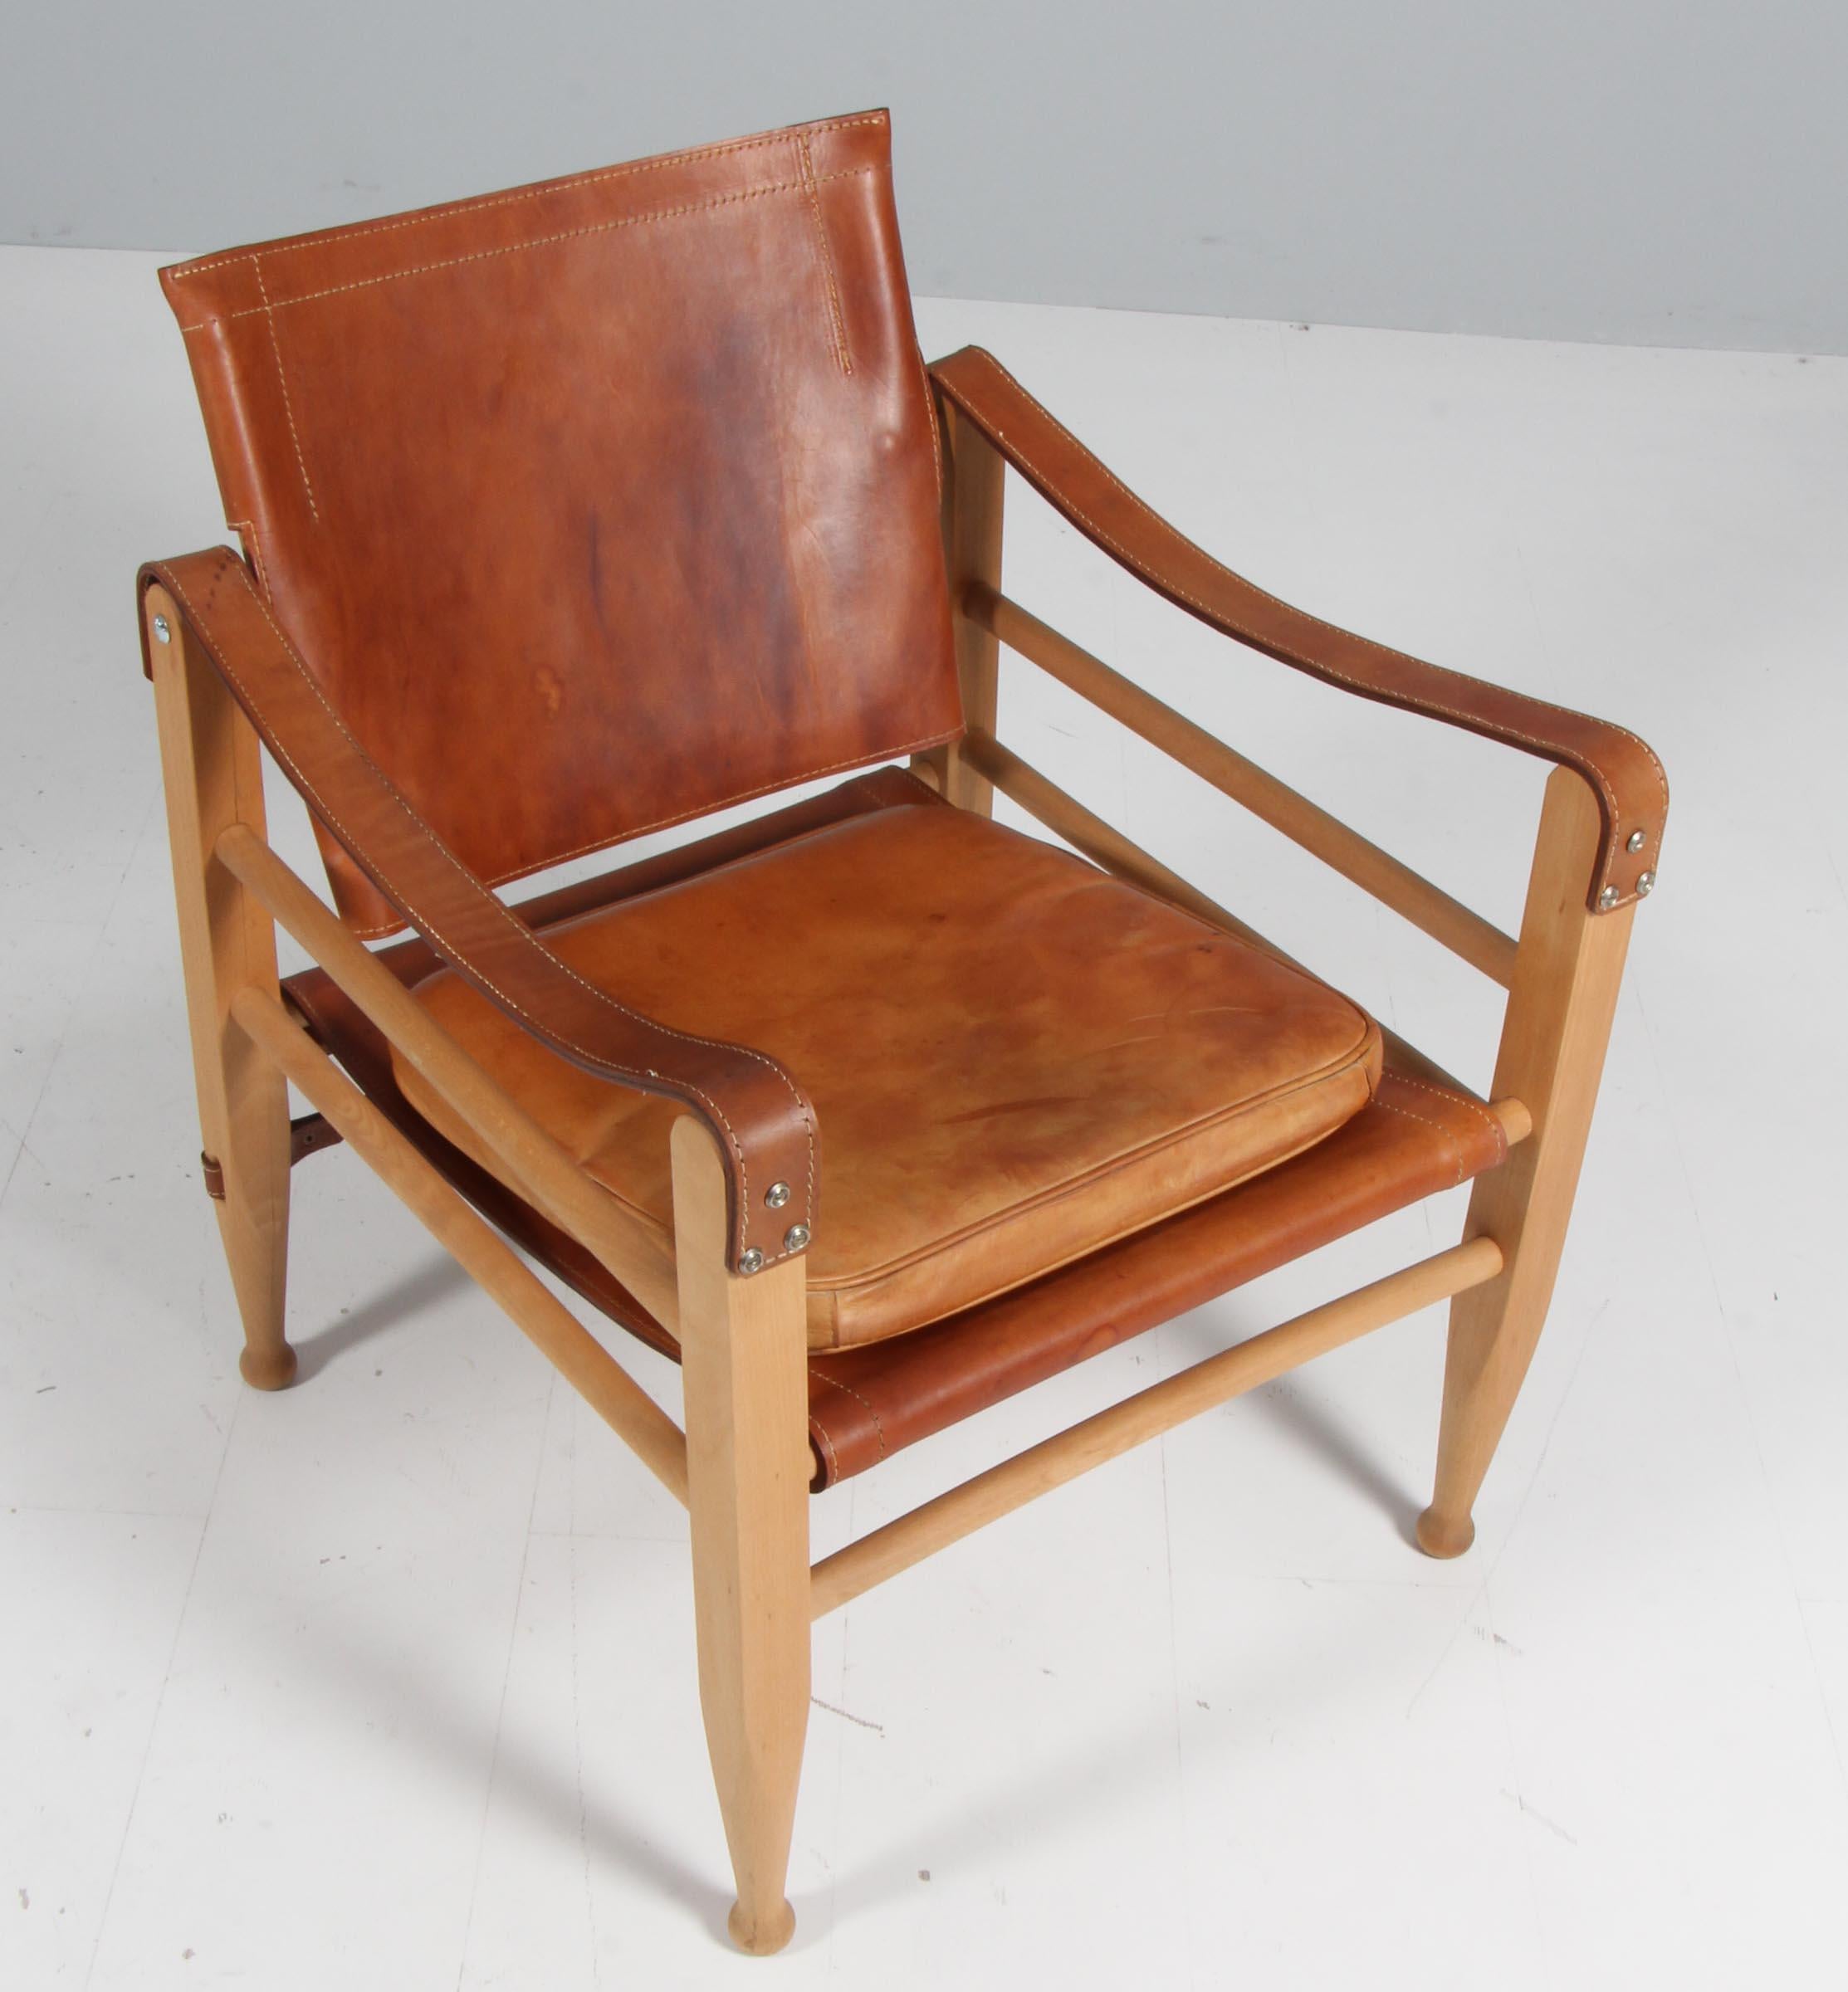 Aage Bruun & Son safari chair with frame of beech. Seat, back and armrests of patinated cognac saddle leather. 

Made in the 1960's by Aage Bruun & Son.